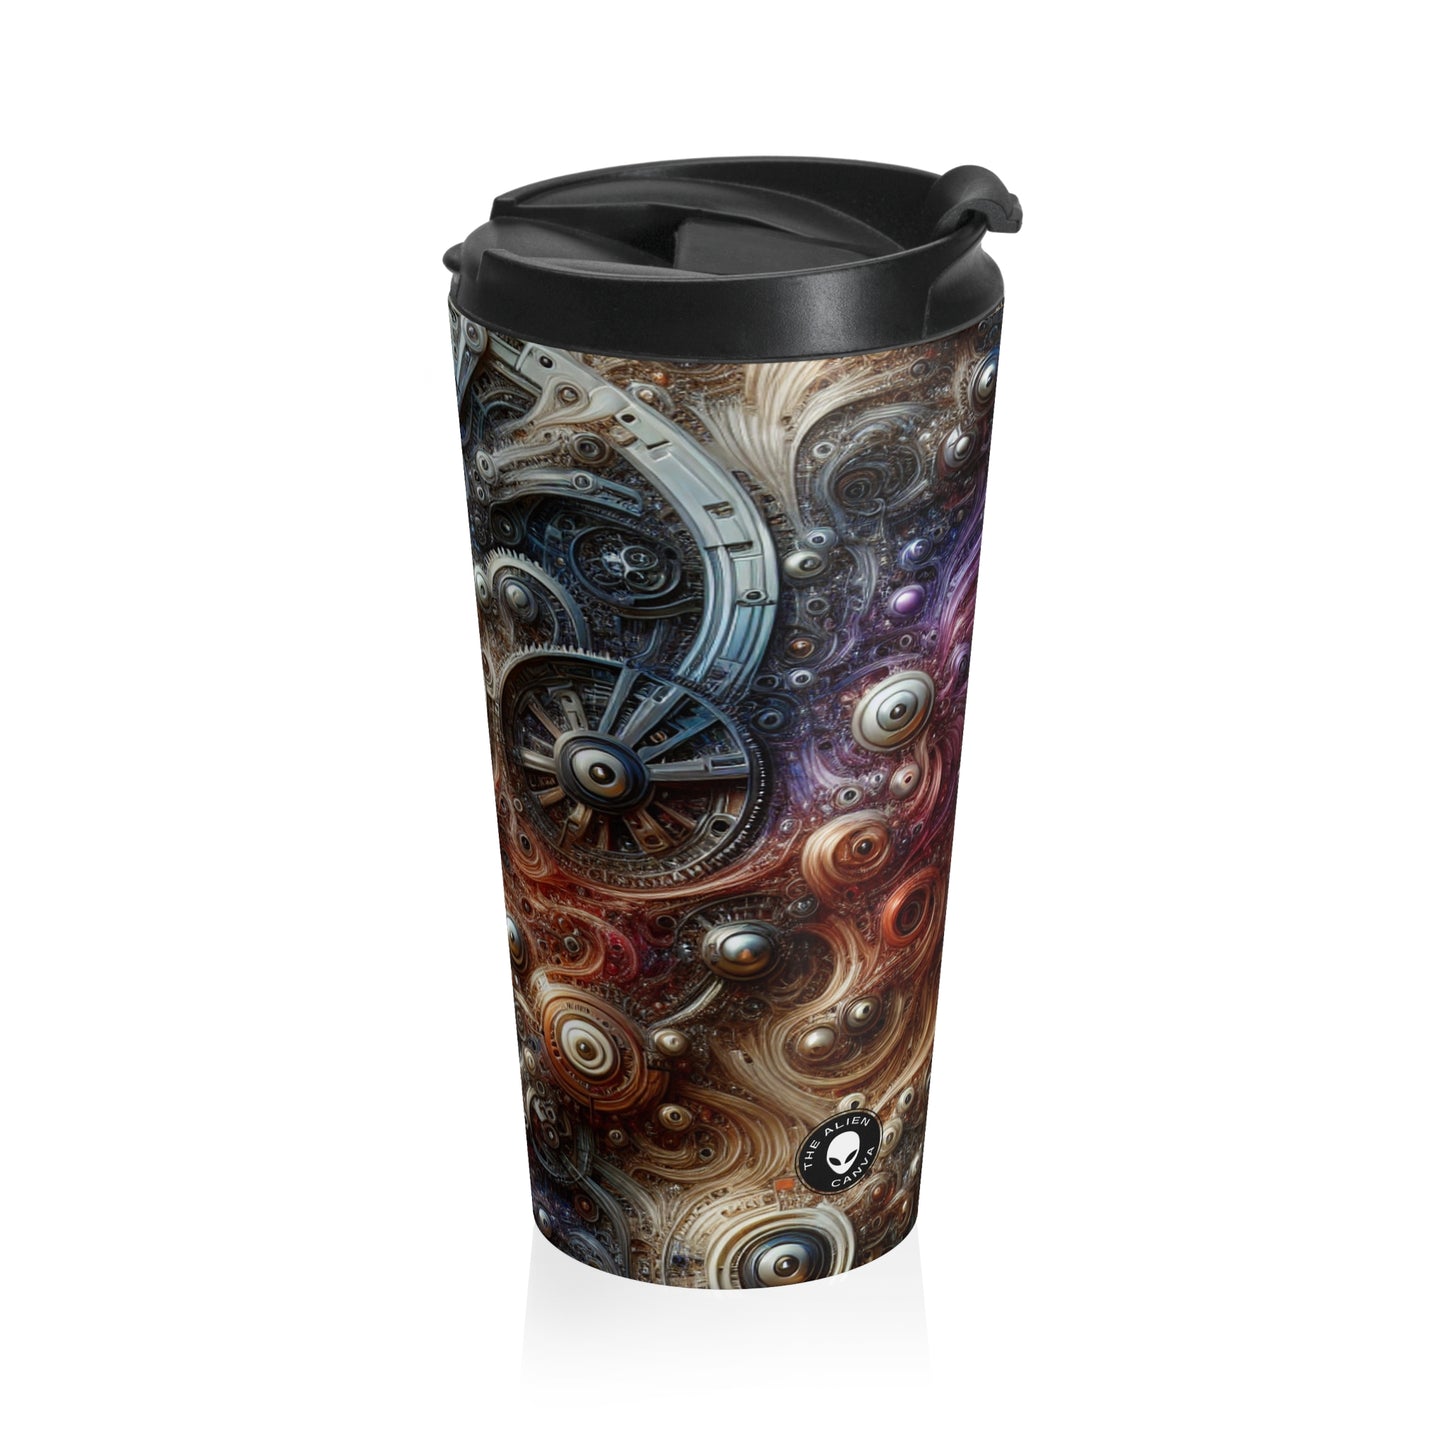 "Cybernetic Sentinel: A Futuristic Fusion of Man and Machine" - The Alien Stainless Steel Travel Mug Bio-mechanical Art